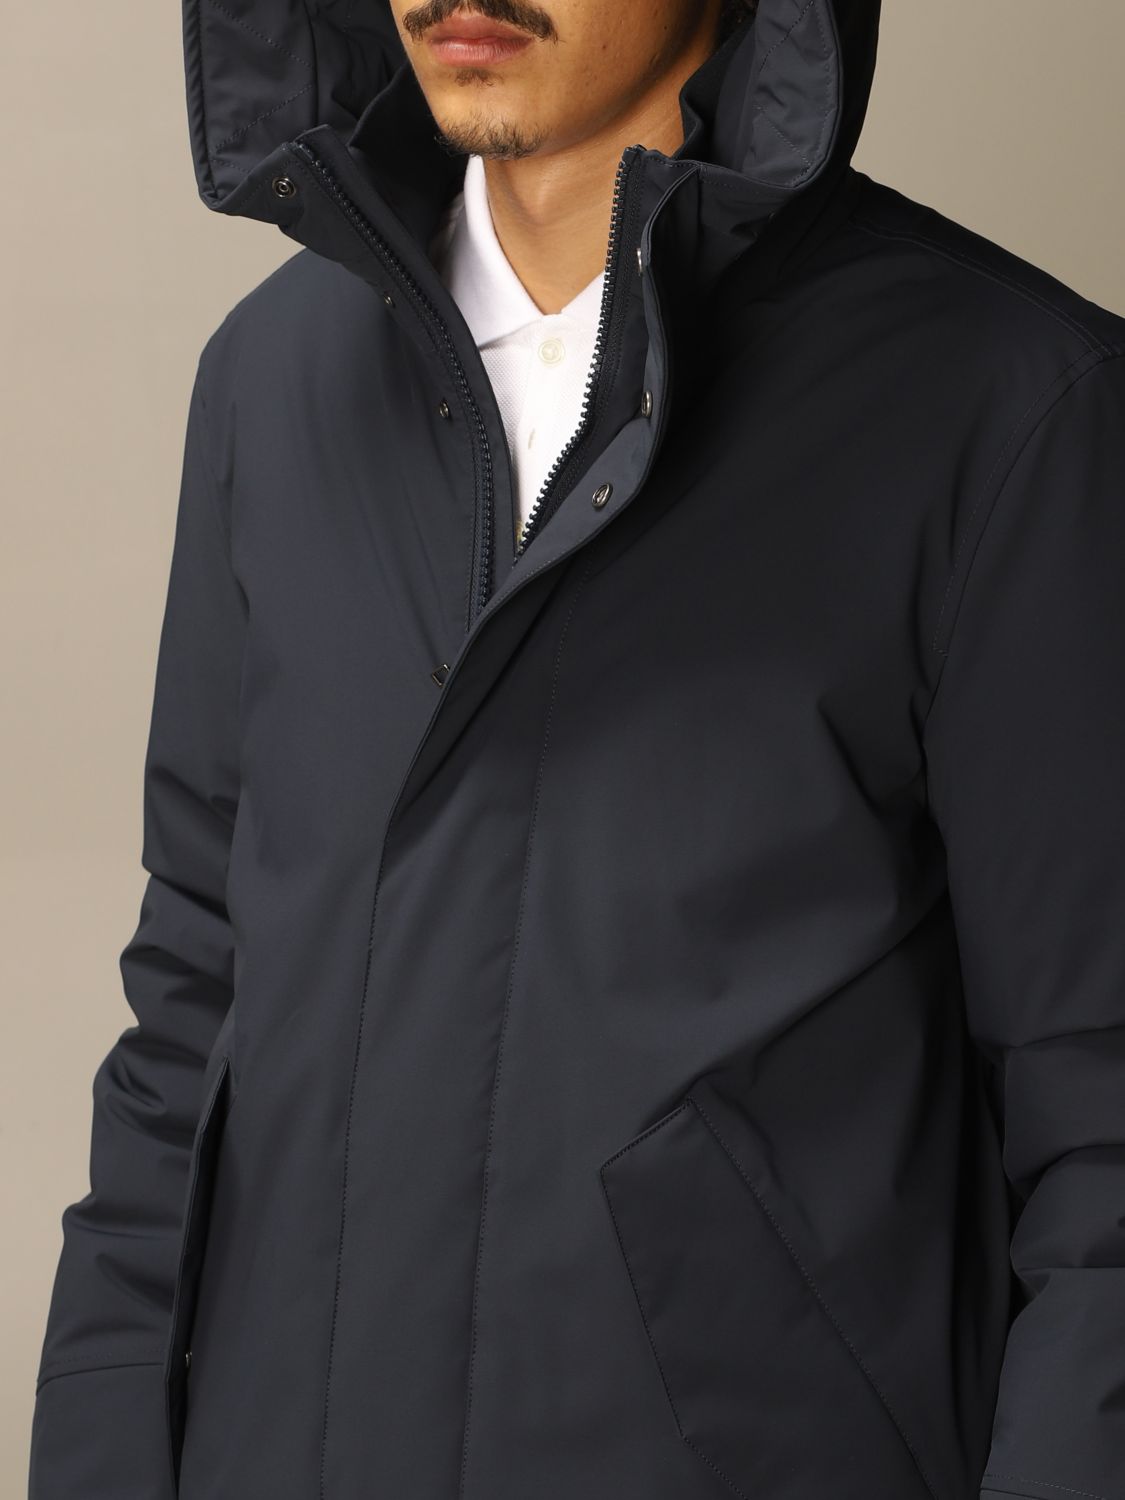 Woolrich Outlet: Stretch mountain parka with hood - Blue | Jacket ...